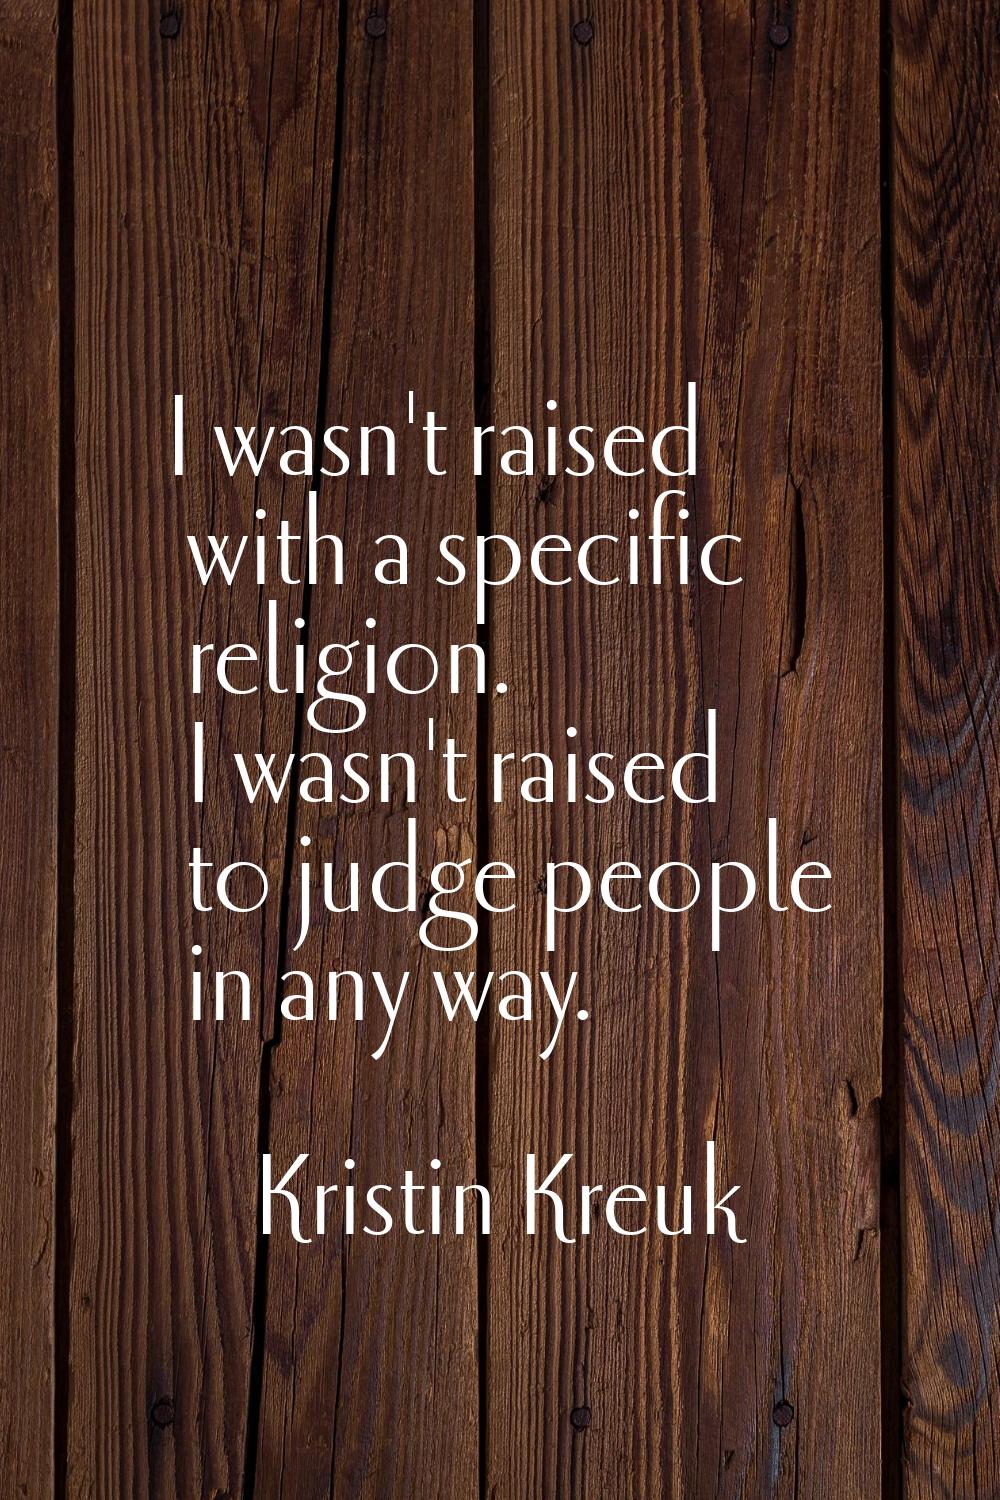 I wasn't raised with a specific religion. I wasn't raised to judge people in any way.